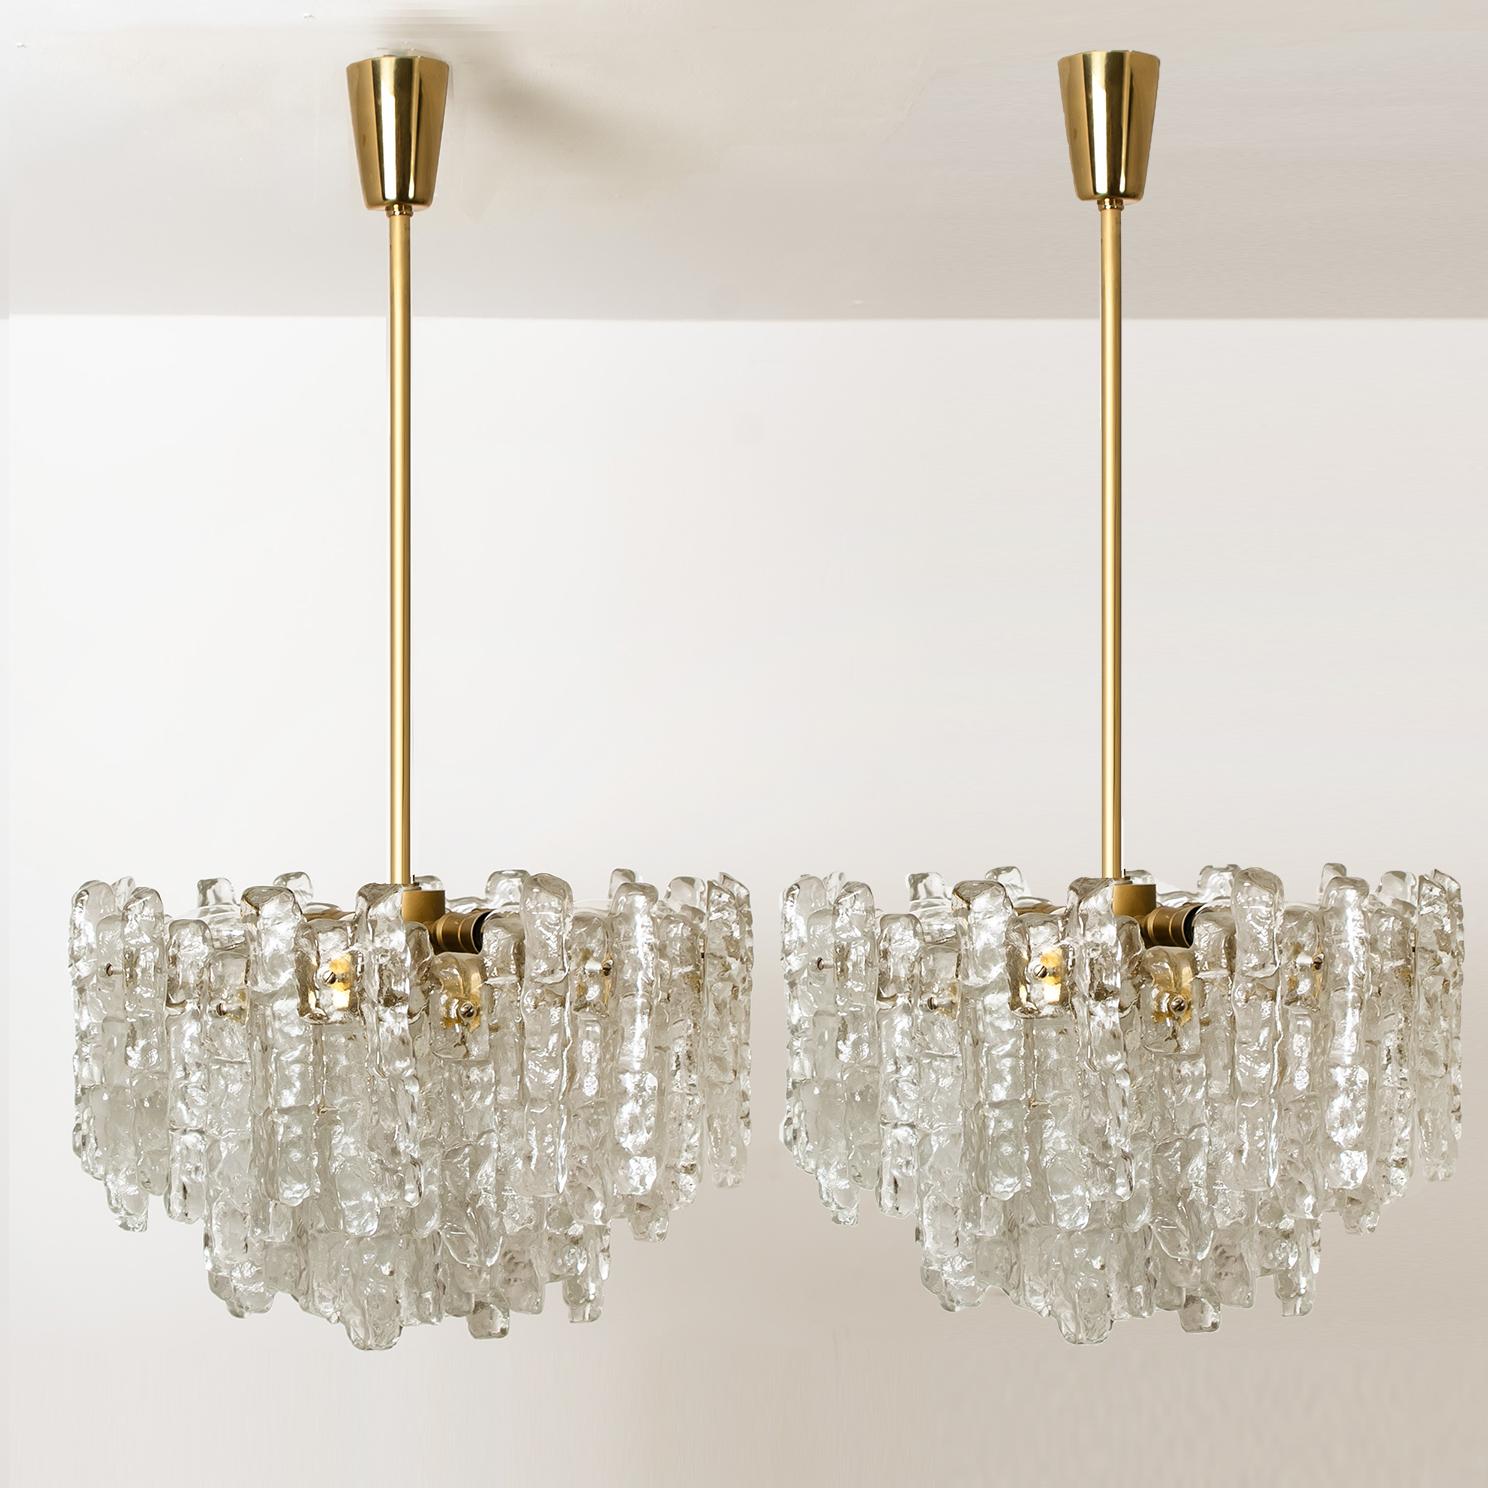 Unique and elegant modern high-end brass colored set of light fixtures, manufactured by Kalmar, Austria in the 1970s. Lovely design, executed to a very high standard. Each chandelier has trier layers of extremely stylish textured solid ice glass